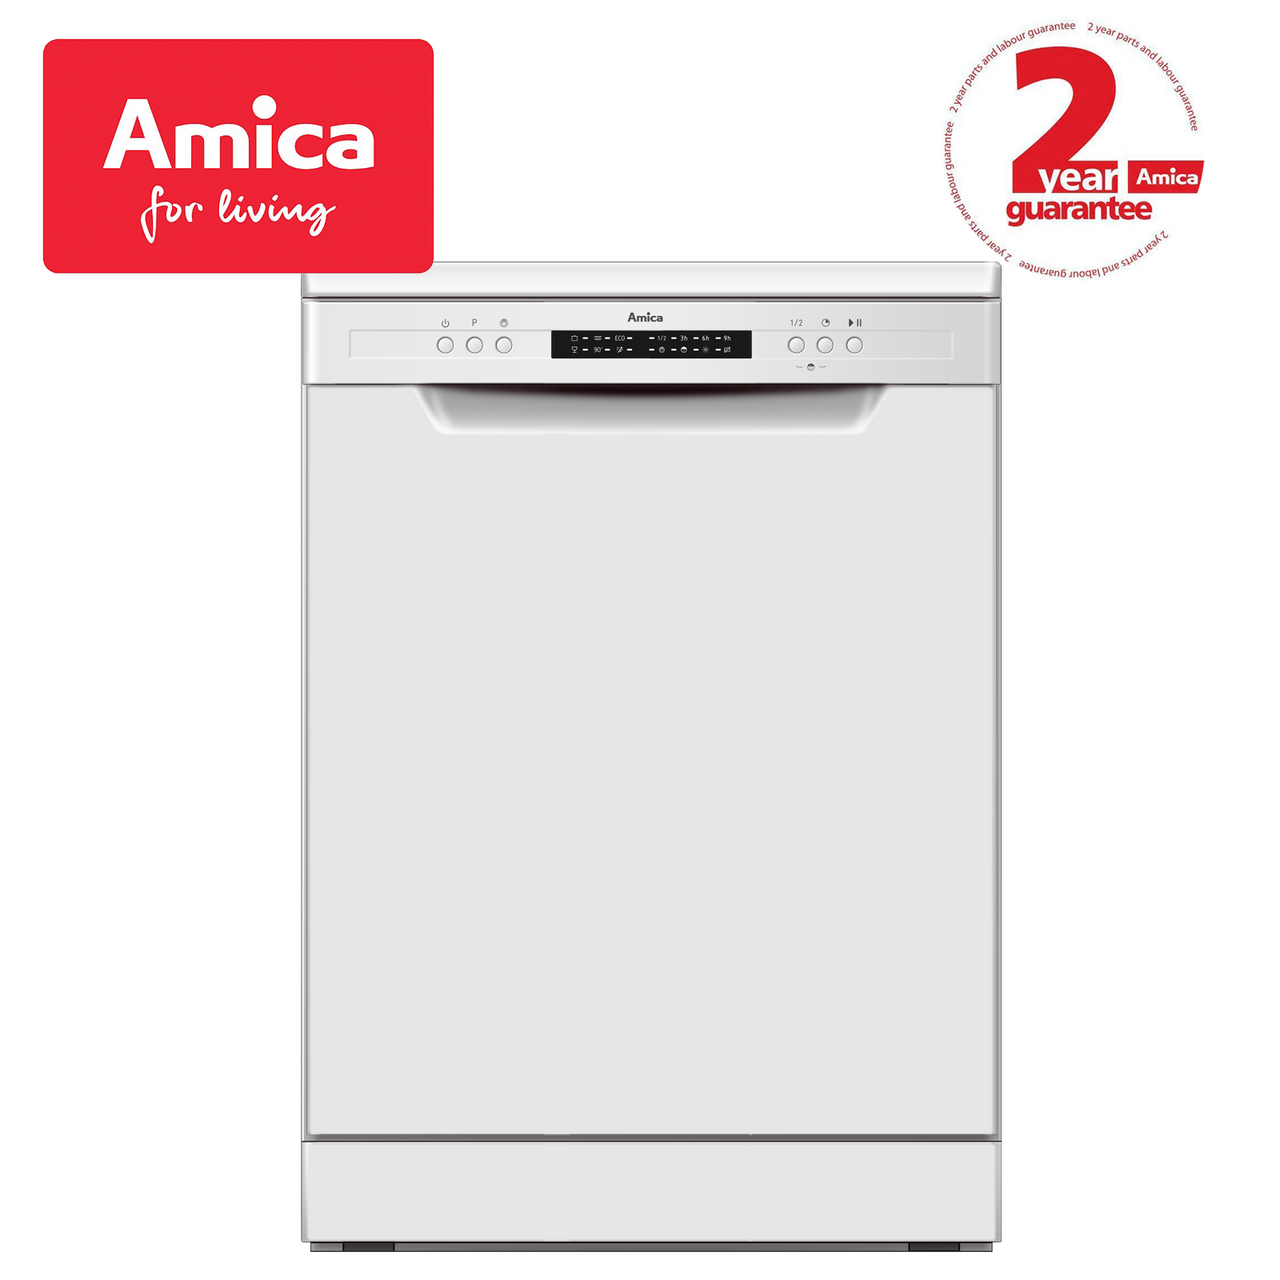 Amica 60cm Freestanding Dishwasher In White - ADF630WH New + 2 Year Guarantee